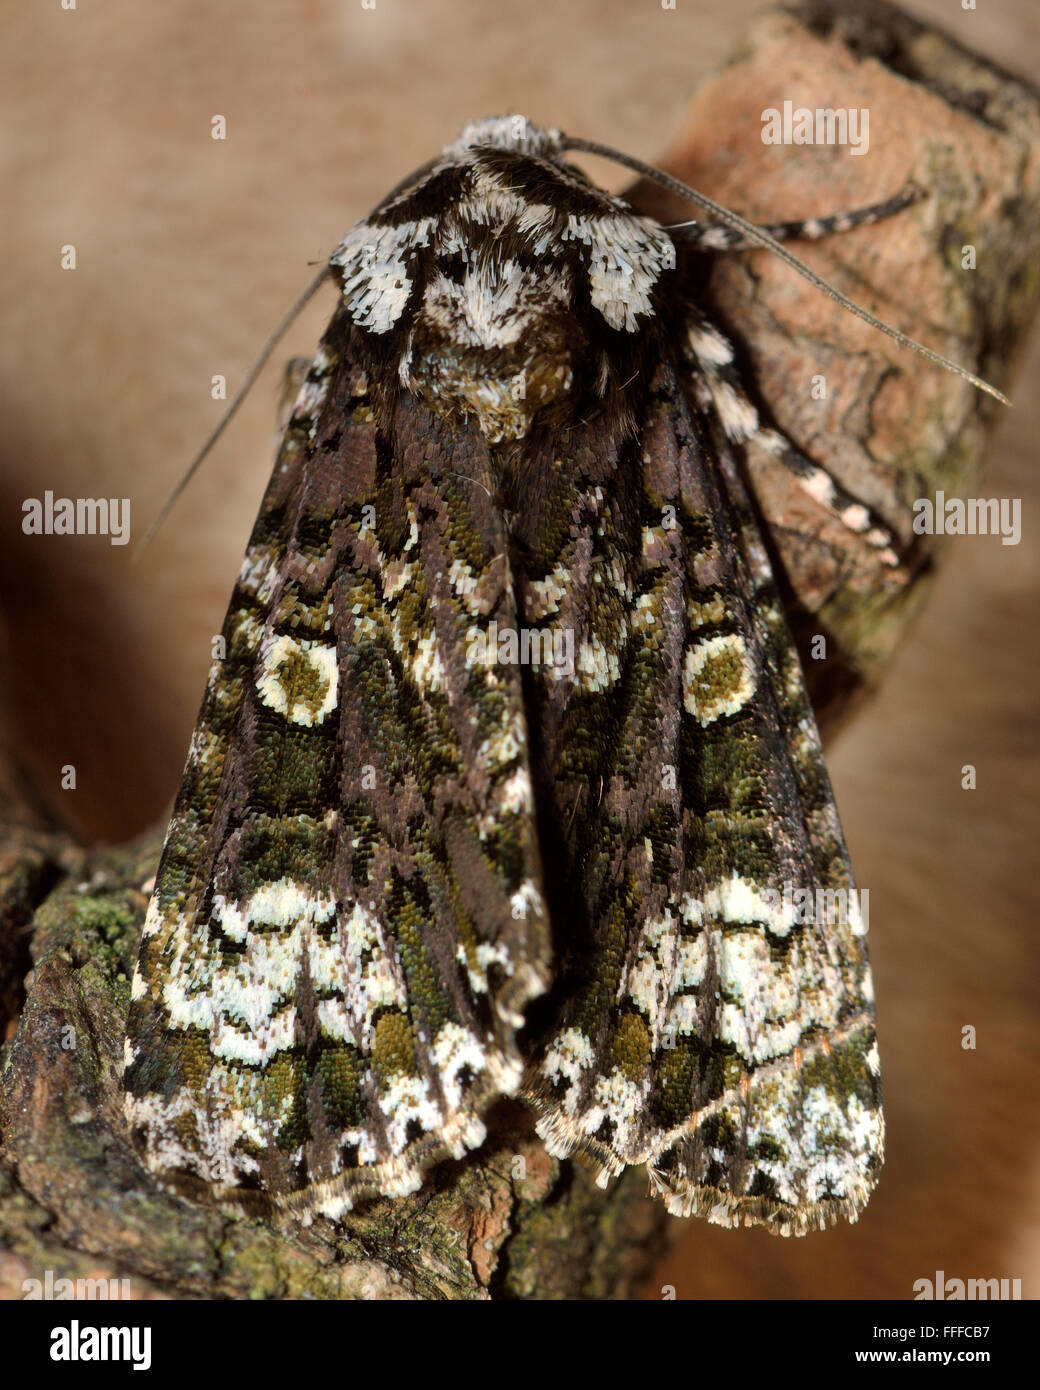 The coronet moth (Craniophora ligustri). A moth in the family Noctuidae, seen at rest on a stick, from above Stock Photo